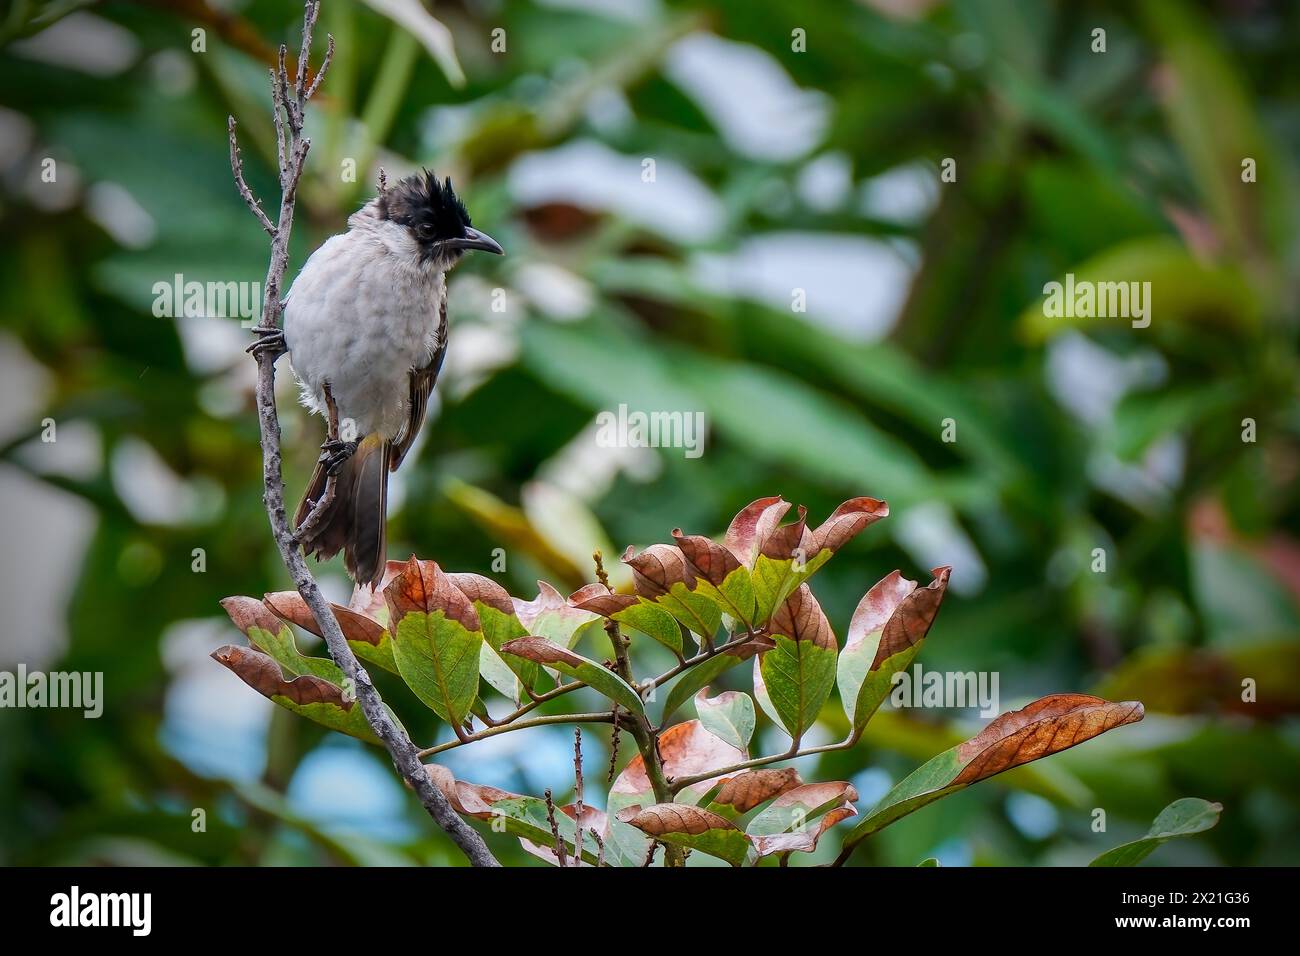 A single Dark-capped Bulbul on a blurred background Stock Photo